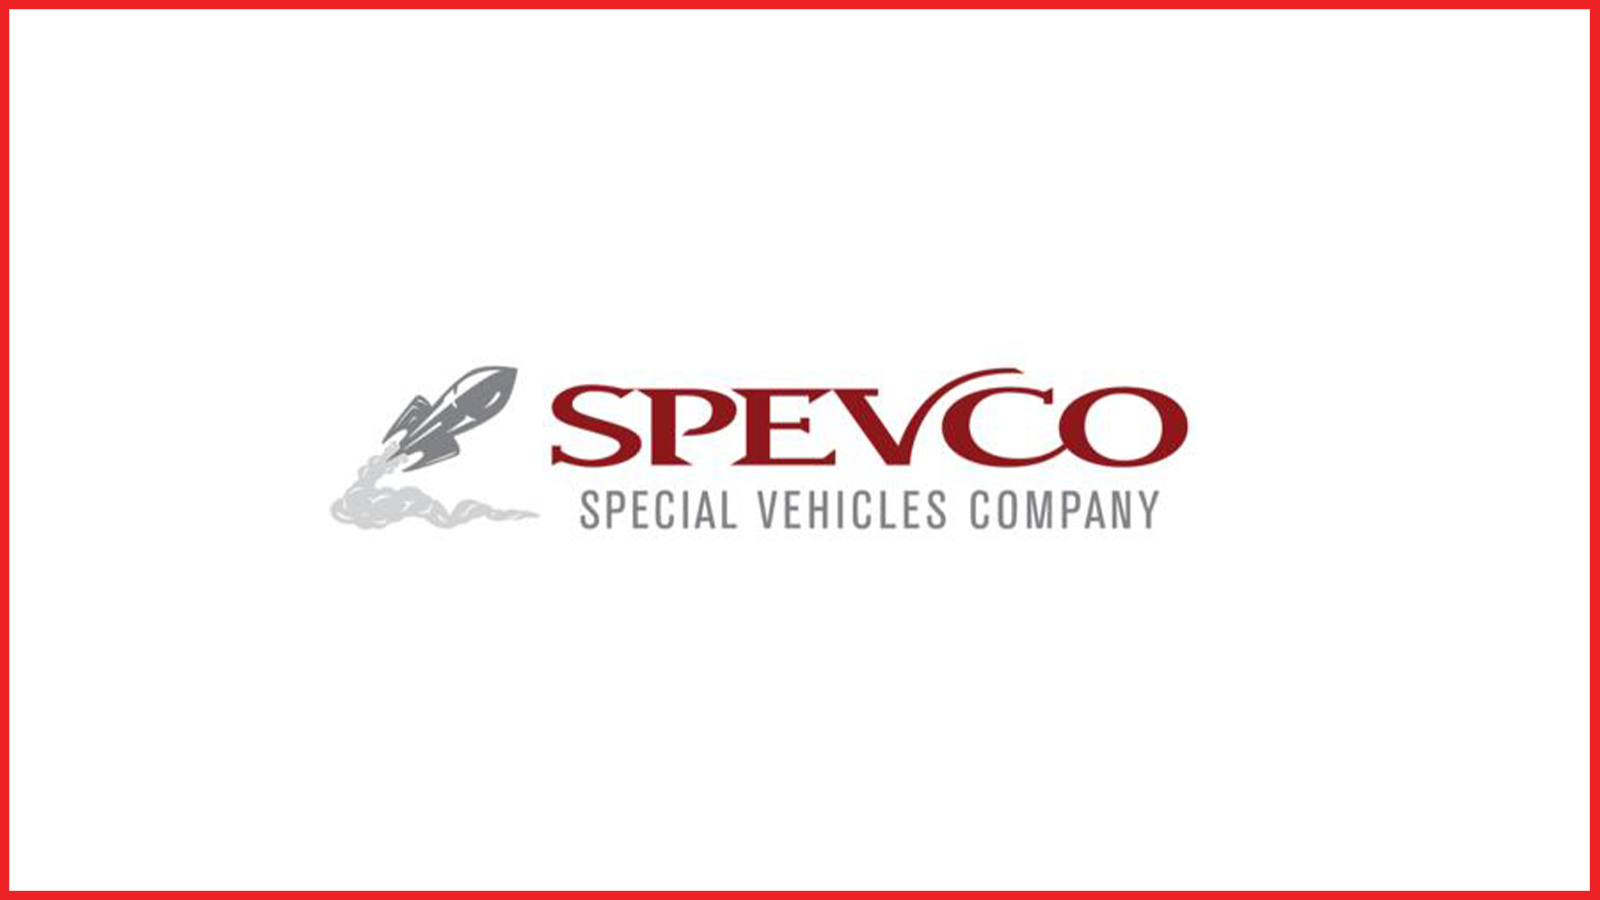 spevco logo with red border